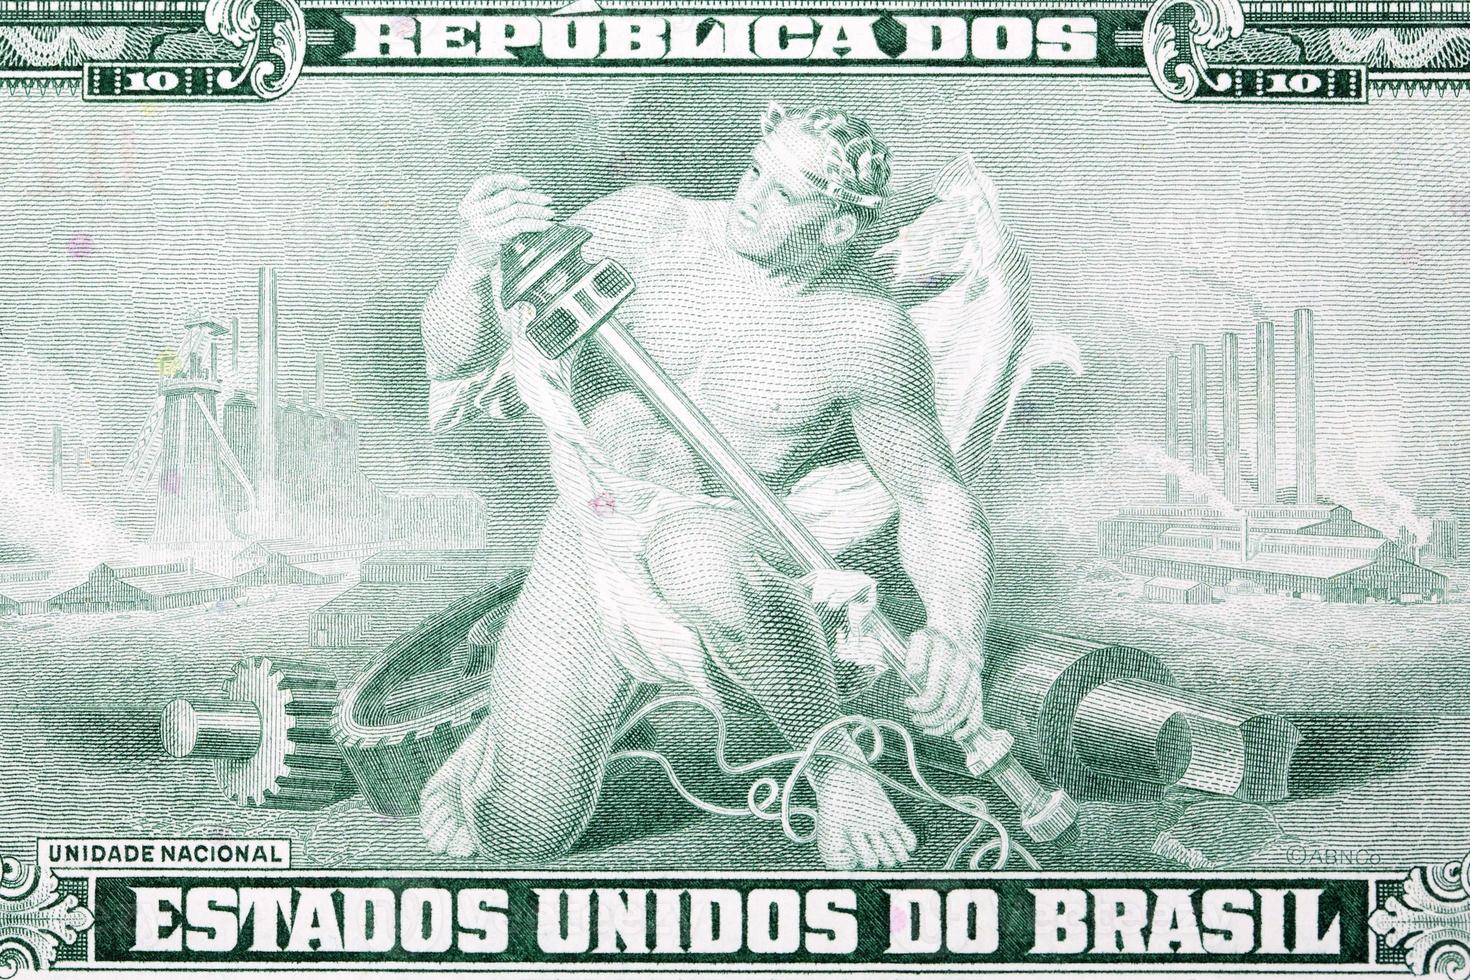 Allegorical man with industrial implements from old Brazilian money photo